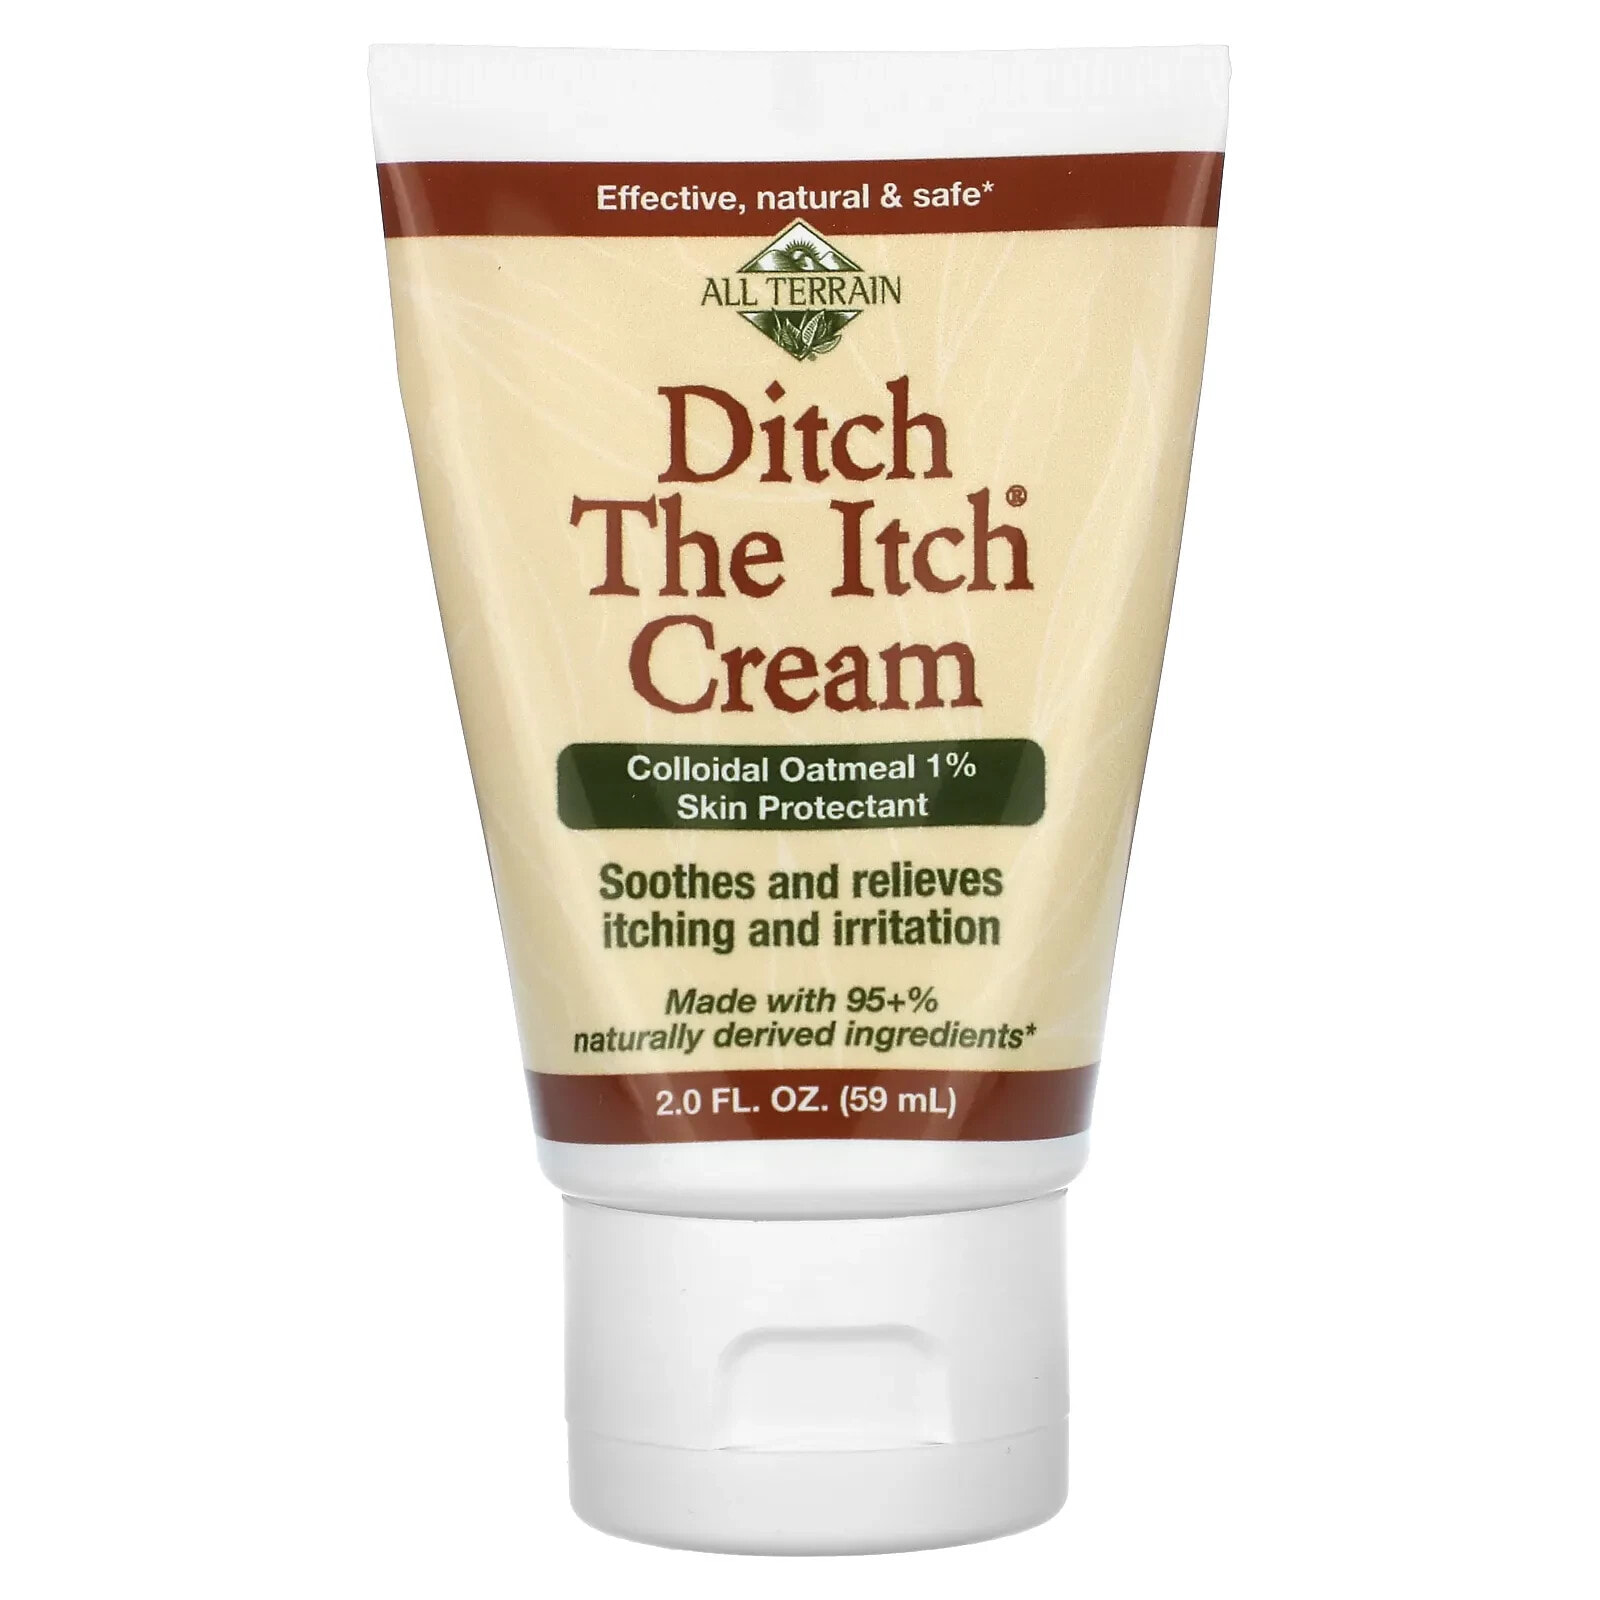 Ditch The Itch Cream, Colloidal Oatmeal 1% Skin Protectant, 2 fl oz (59 ml)